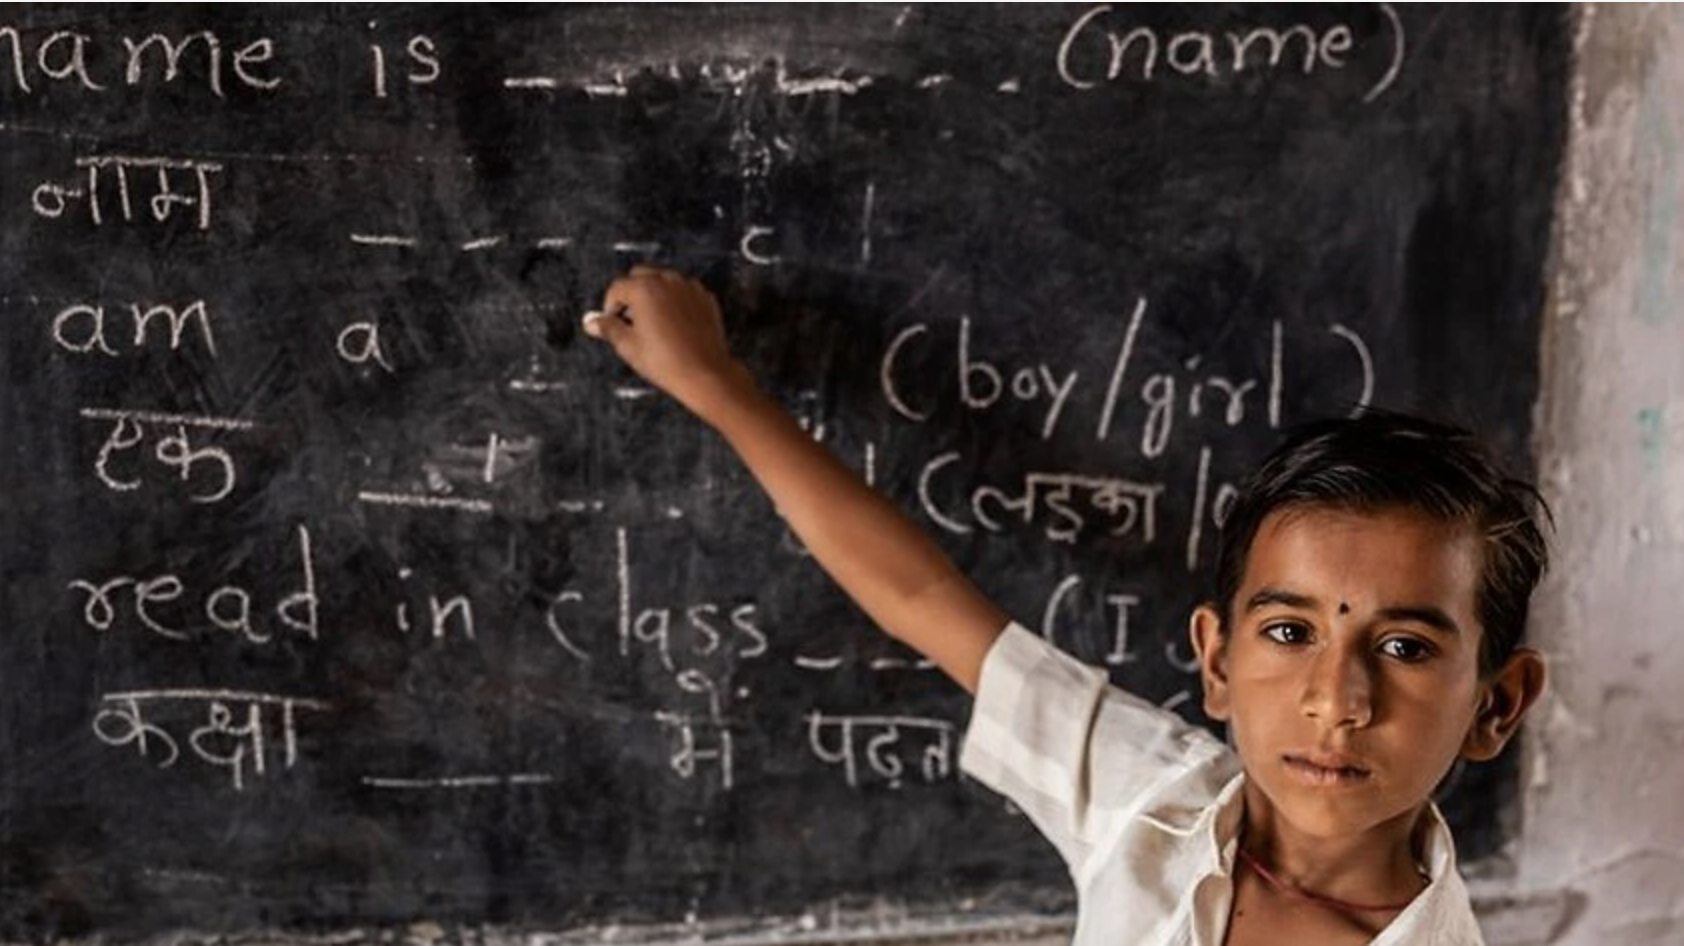 An Indian schoolboy is practicing English on the chalkboard with different English words